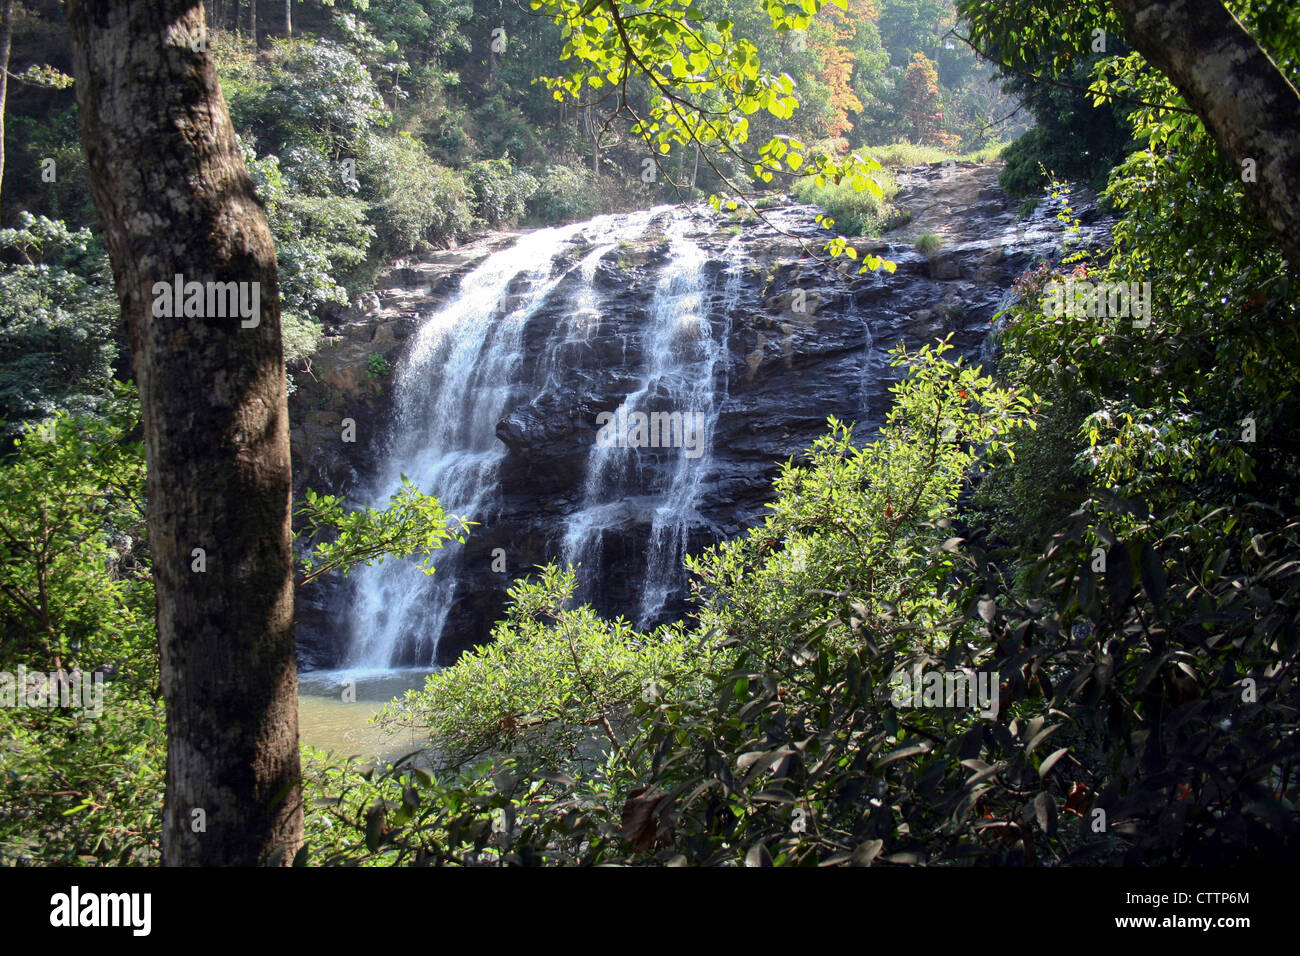 Water Falls viewed amidst thick and lush green vegetation Stock Photo